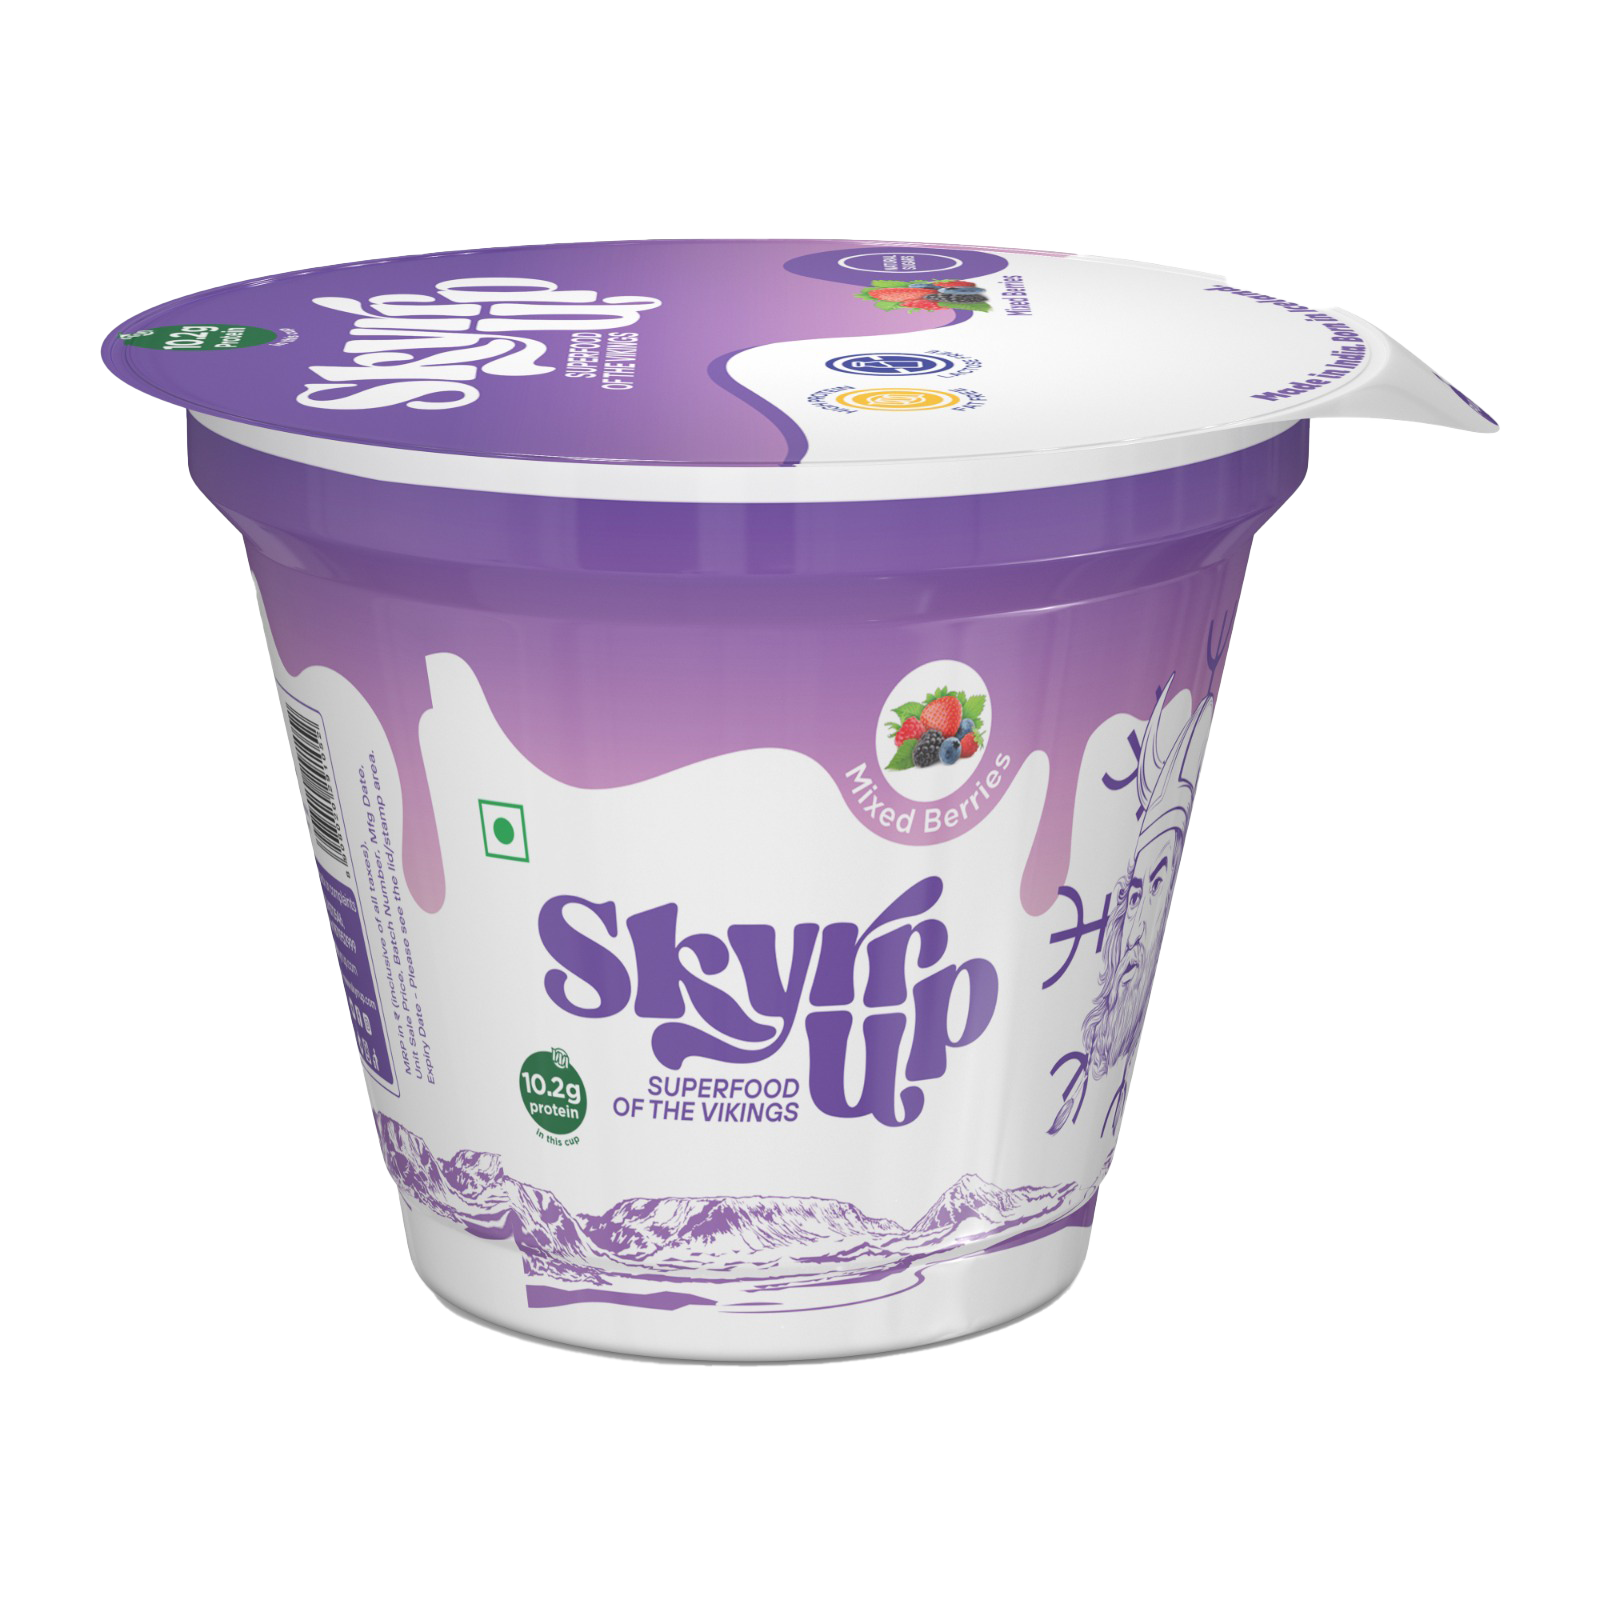 Mixed Berries flavour skyr